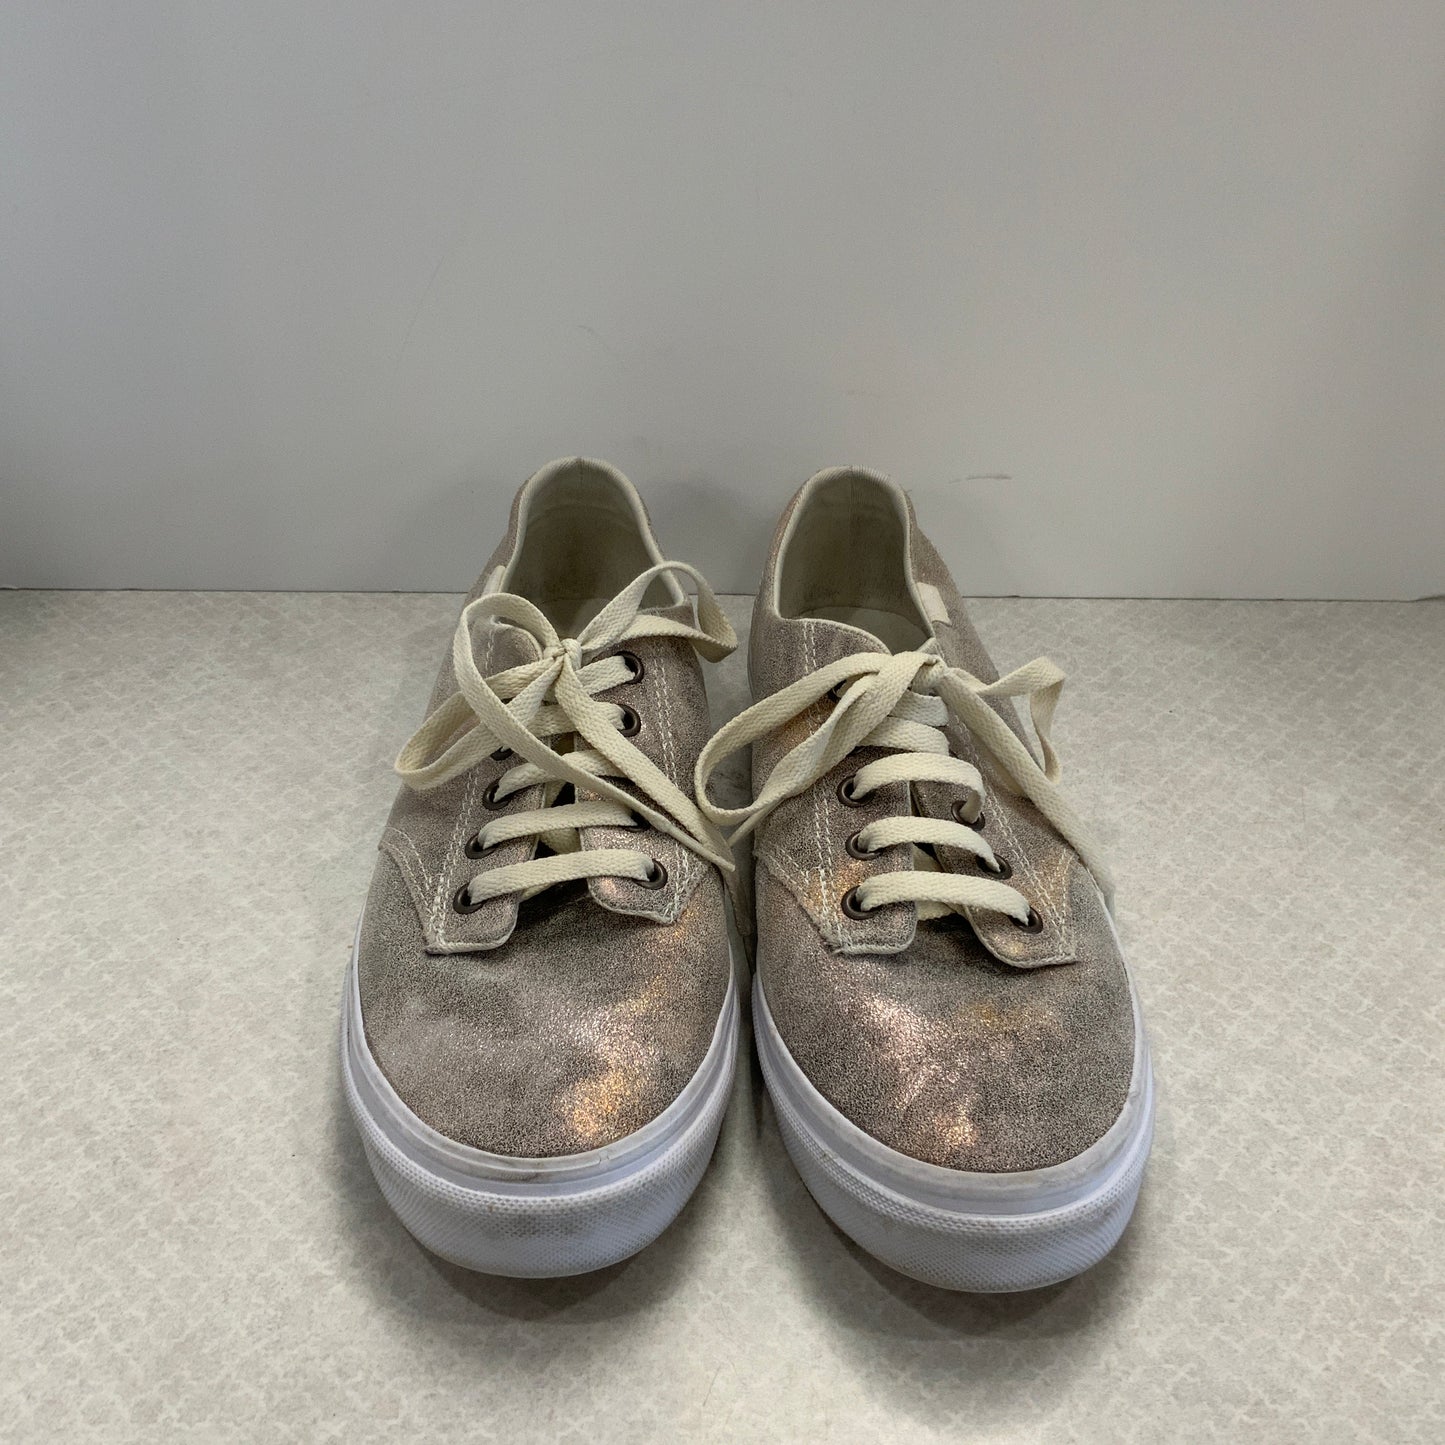 Gold & Silver Shoes Sneakers Vans, Size 9.5